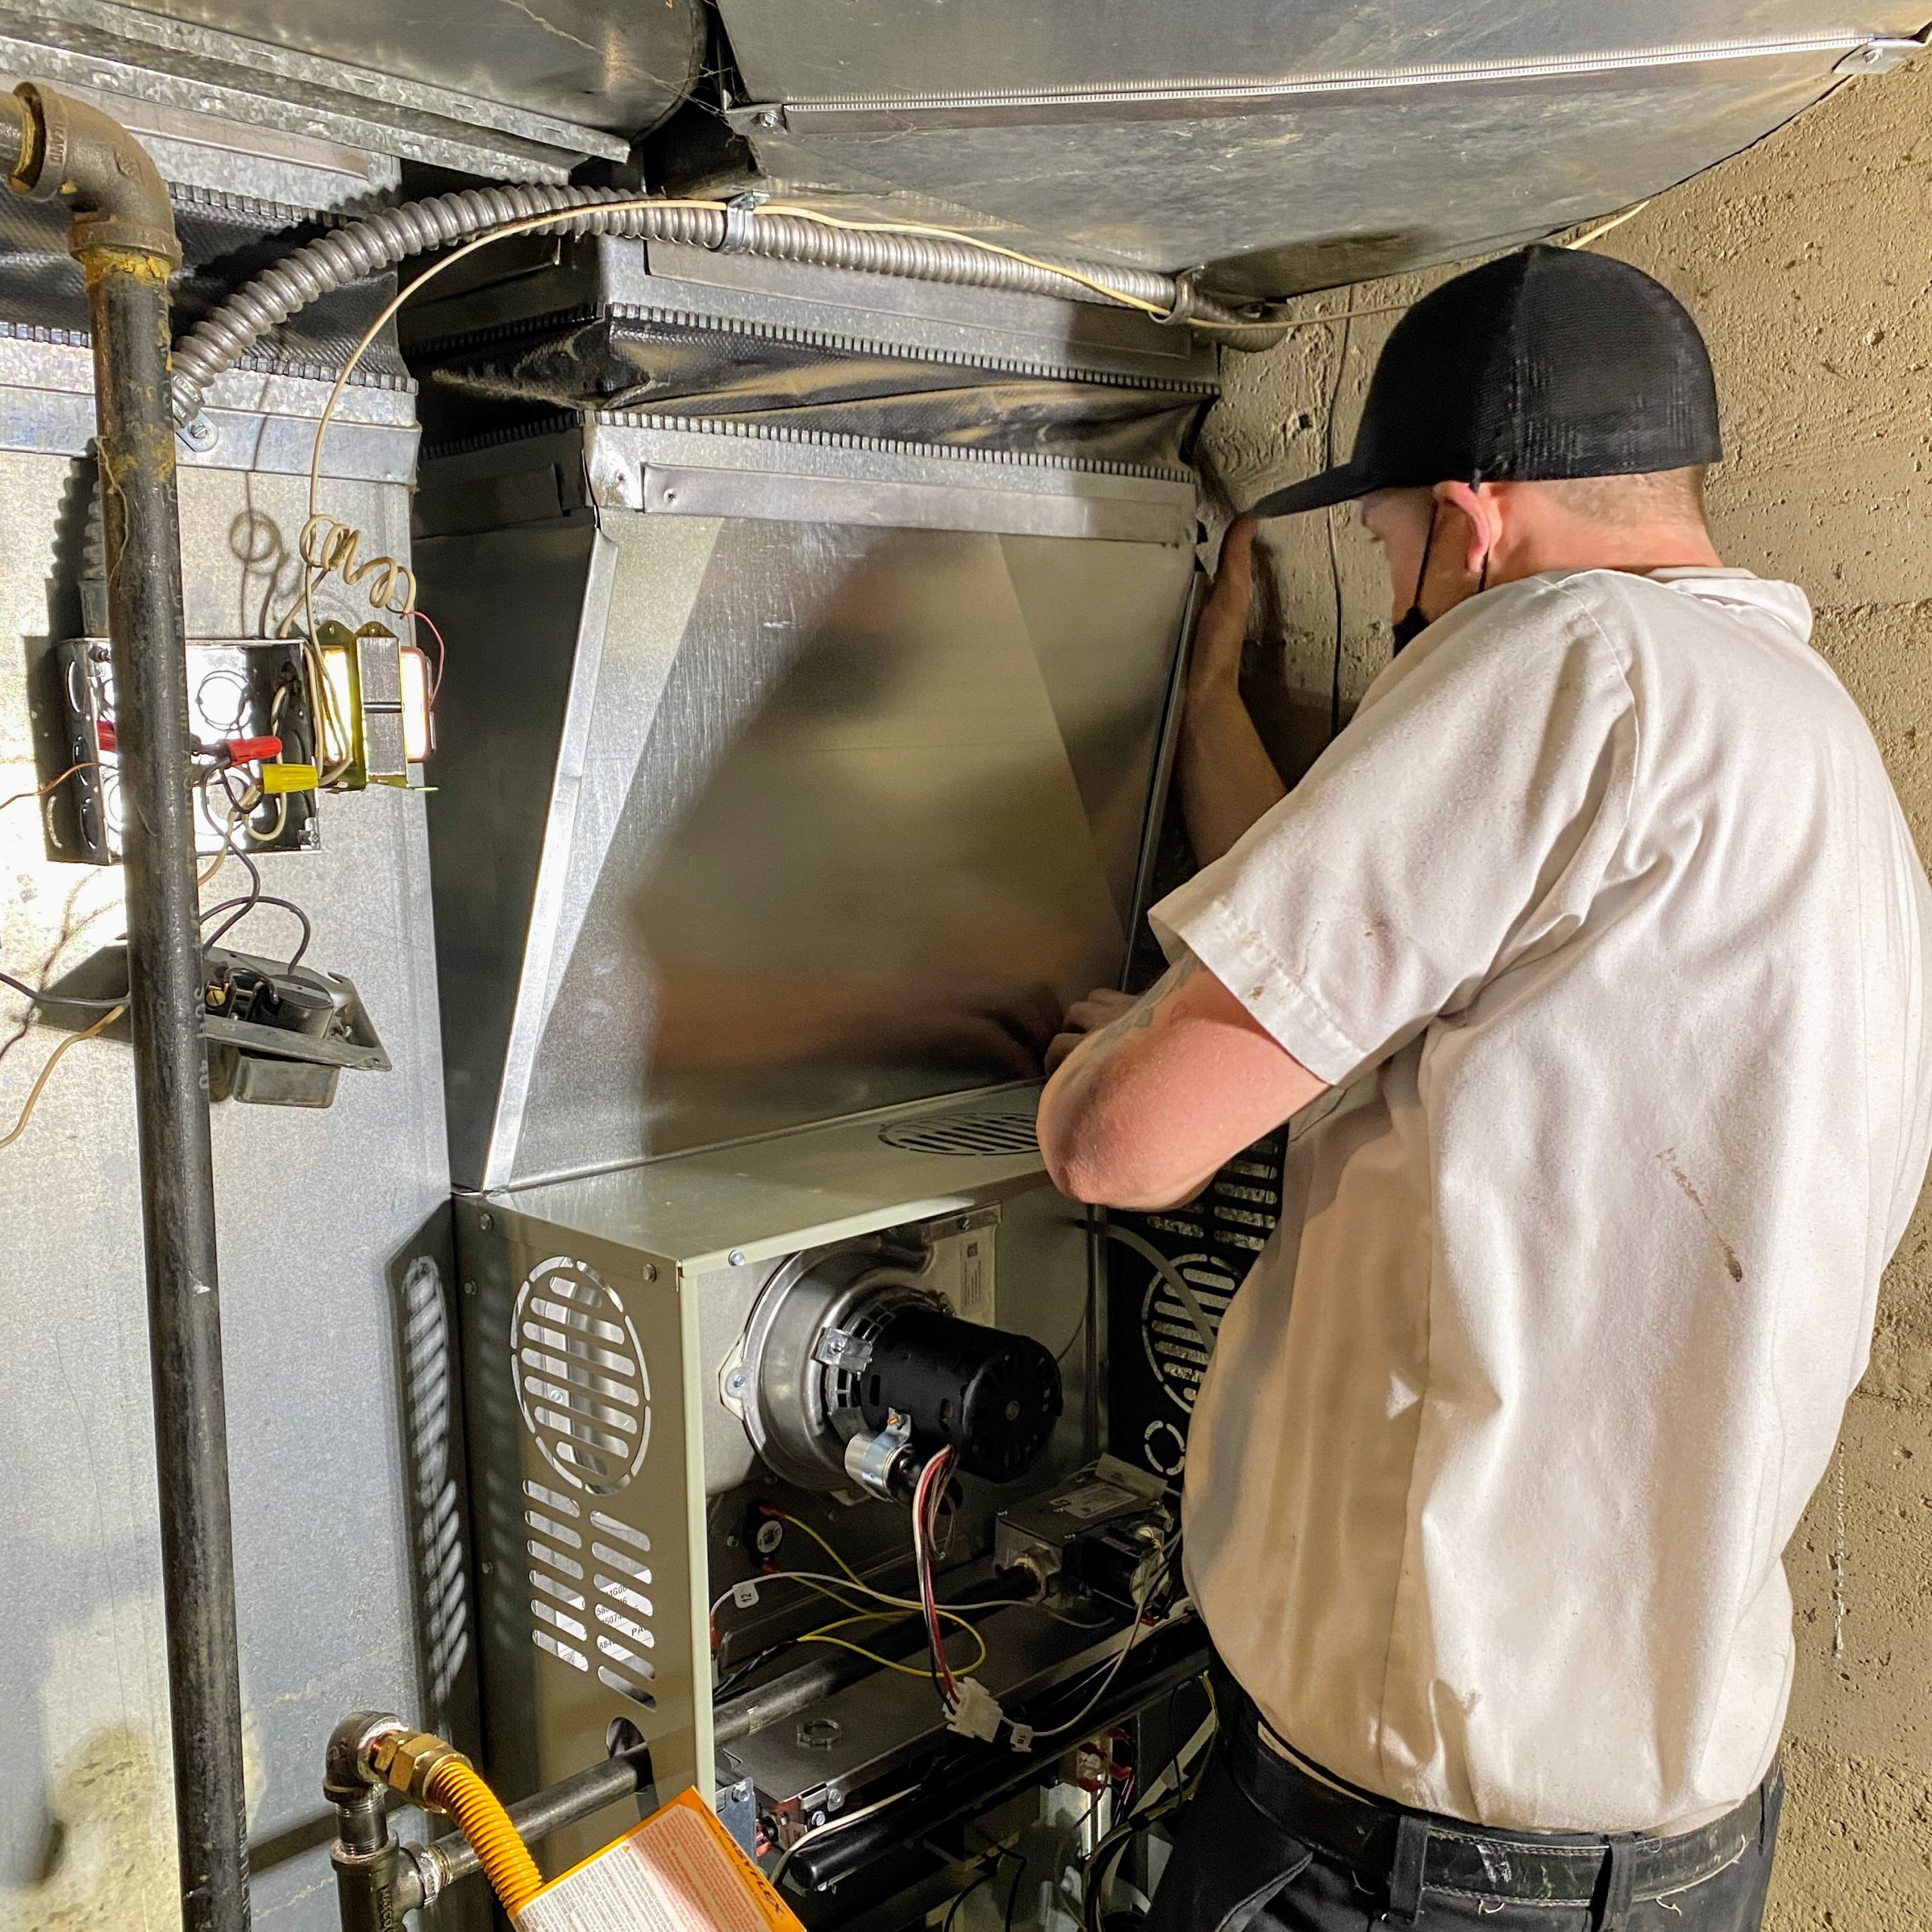 Furnace Repair in Golden, CO from Fix-it 24/7 Plumbing, Heating, Air & Electric